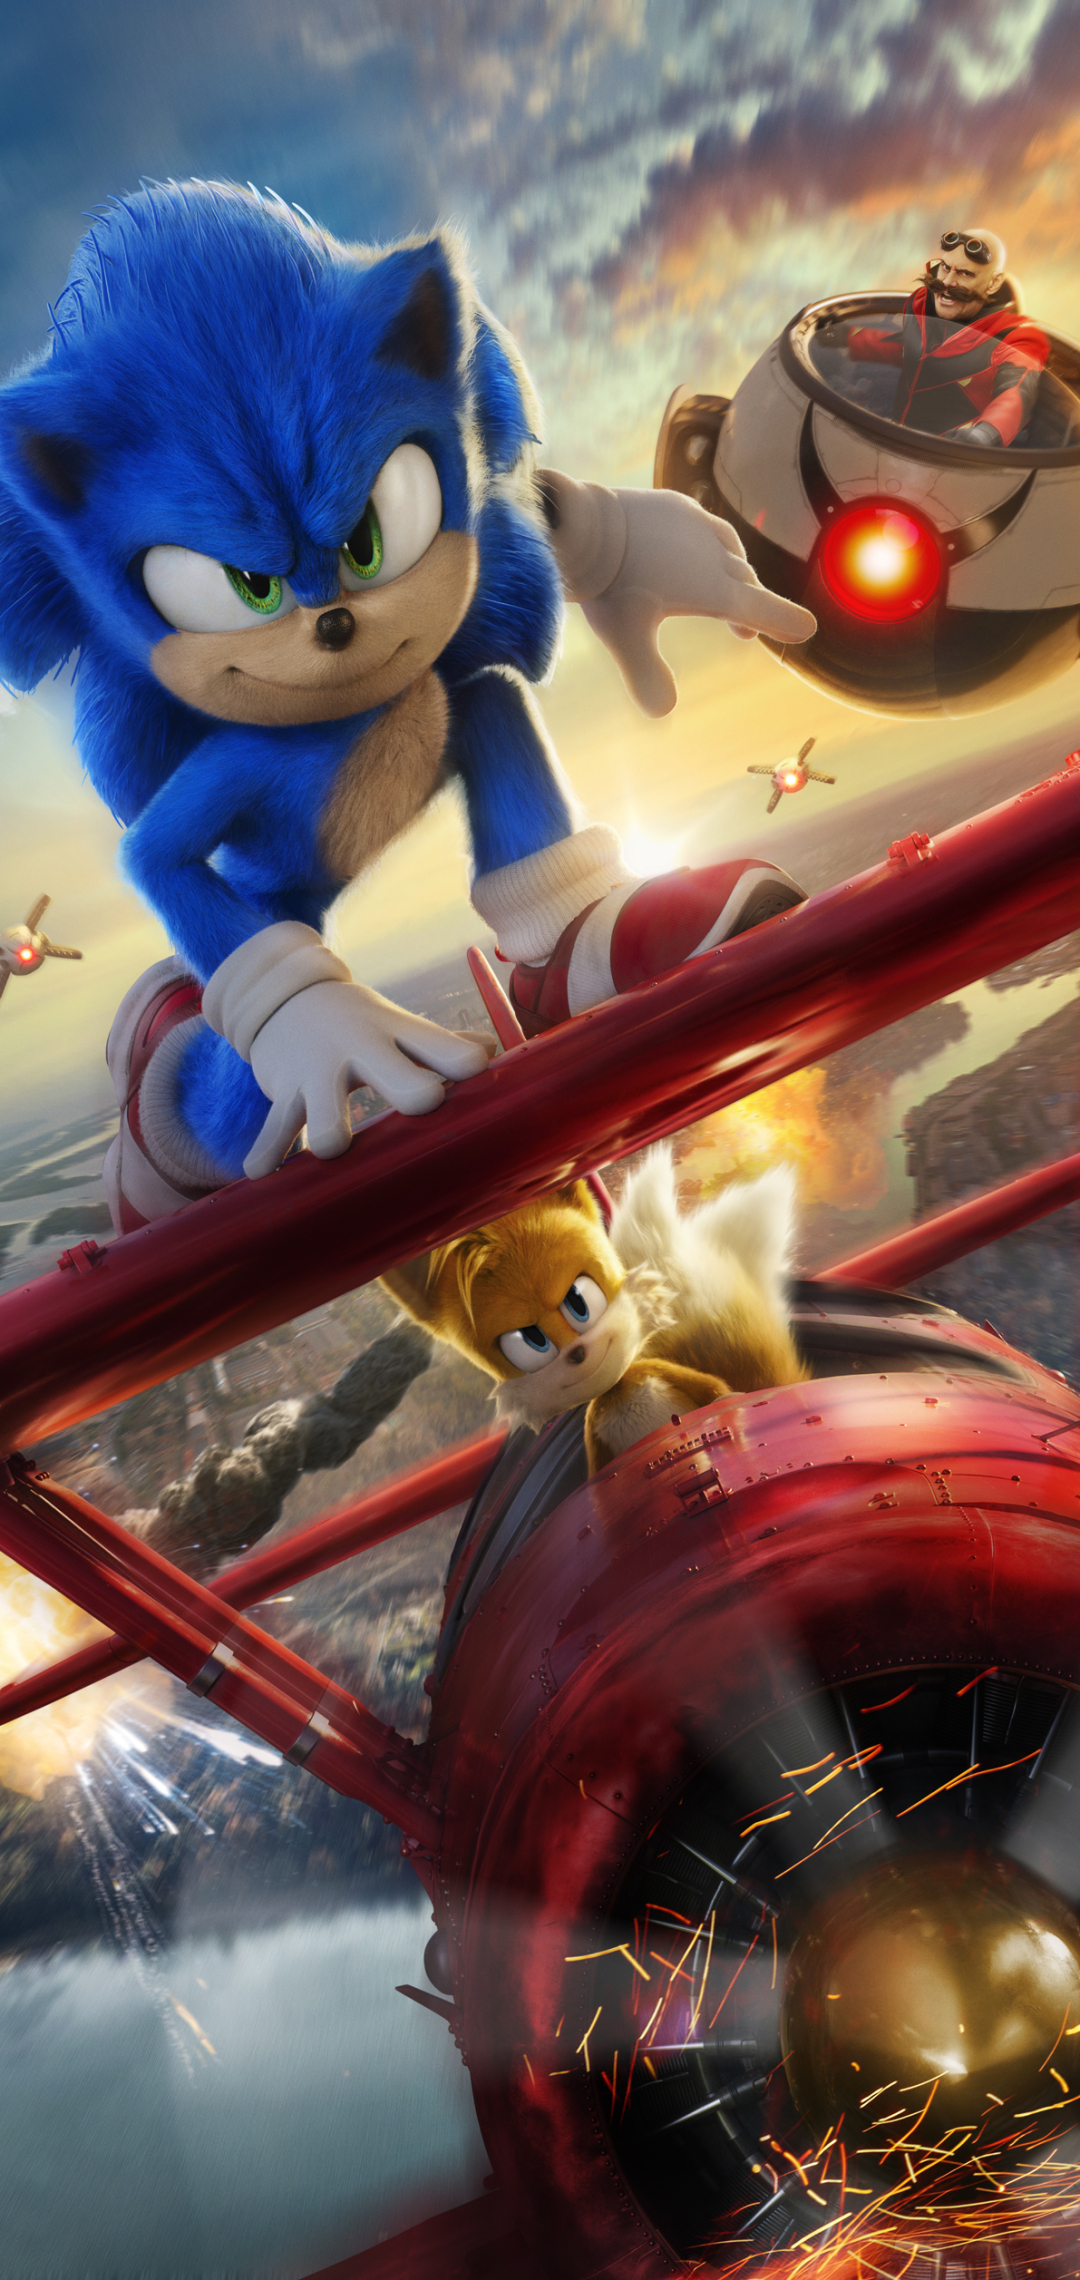 movie, sonic the hedgehog 2, sonic the hedgehog, miles 'tails' prower, doctor robotnik, sonic